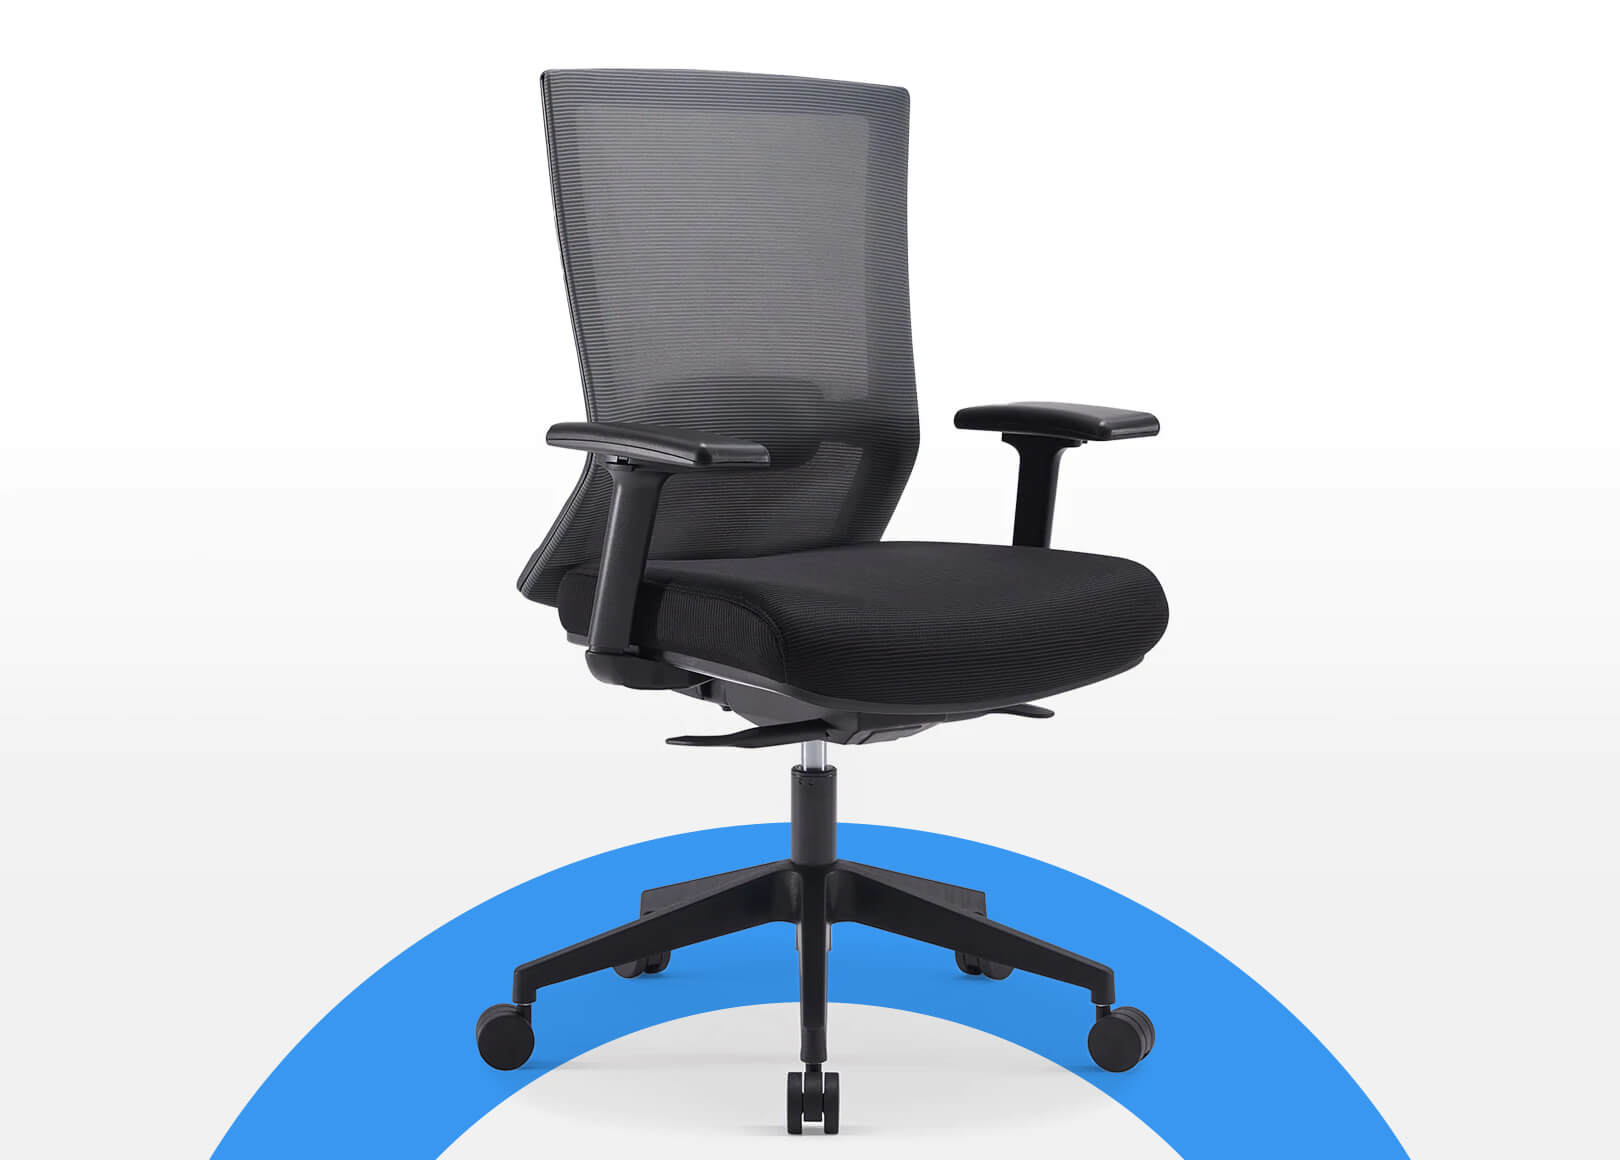 What are the features of an ergonomically designed chair for correct posture ?